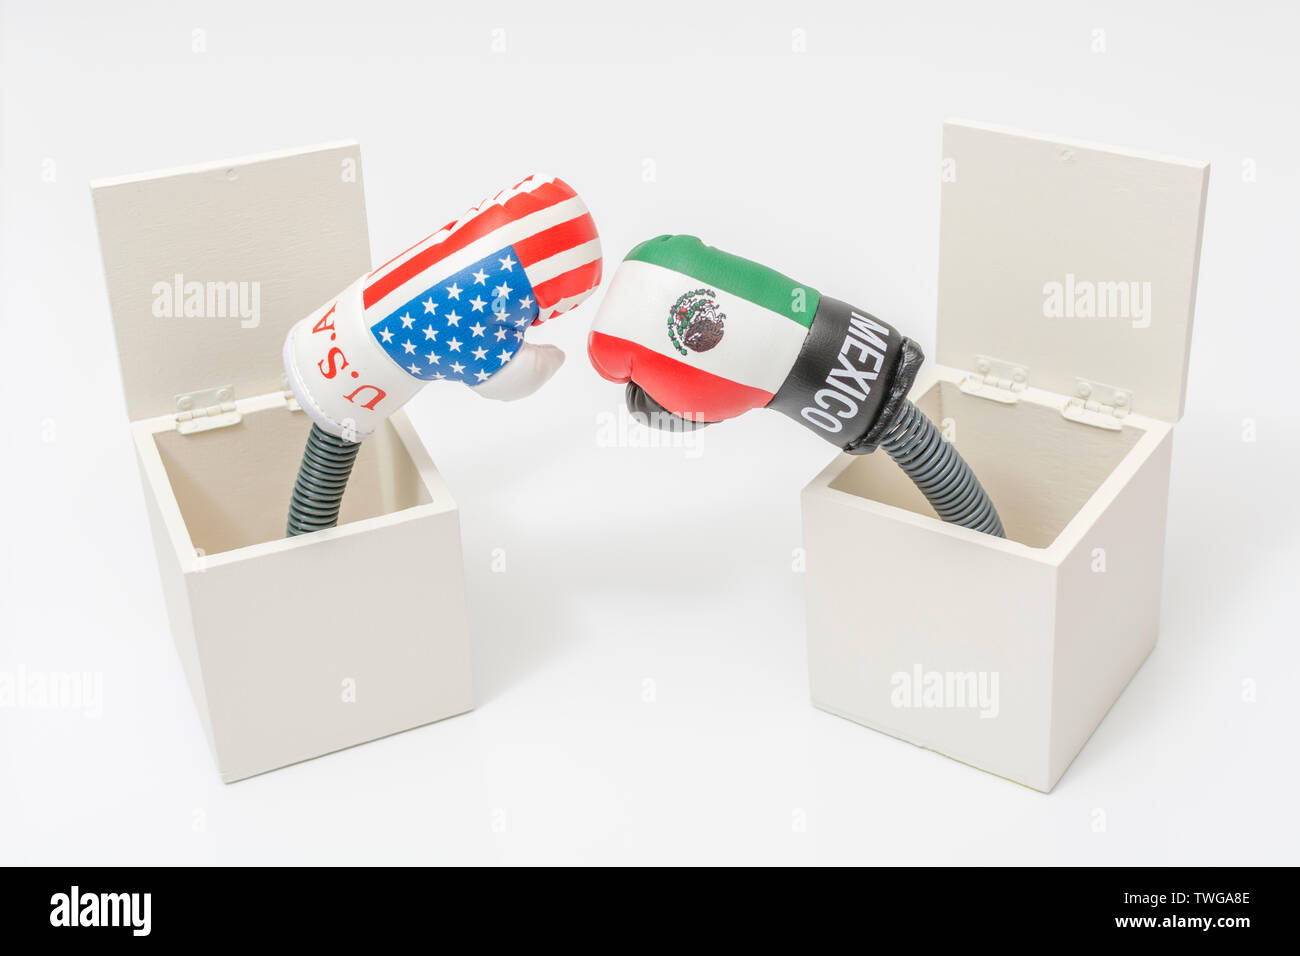 Mini U.S. & Mexico boxing gloves in Jack in a Box concept. Metaphor U.S. Mexico relations, U.S. Mexico trade war, U.S Mexico tariffs, US trading blows Stock Photo